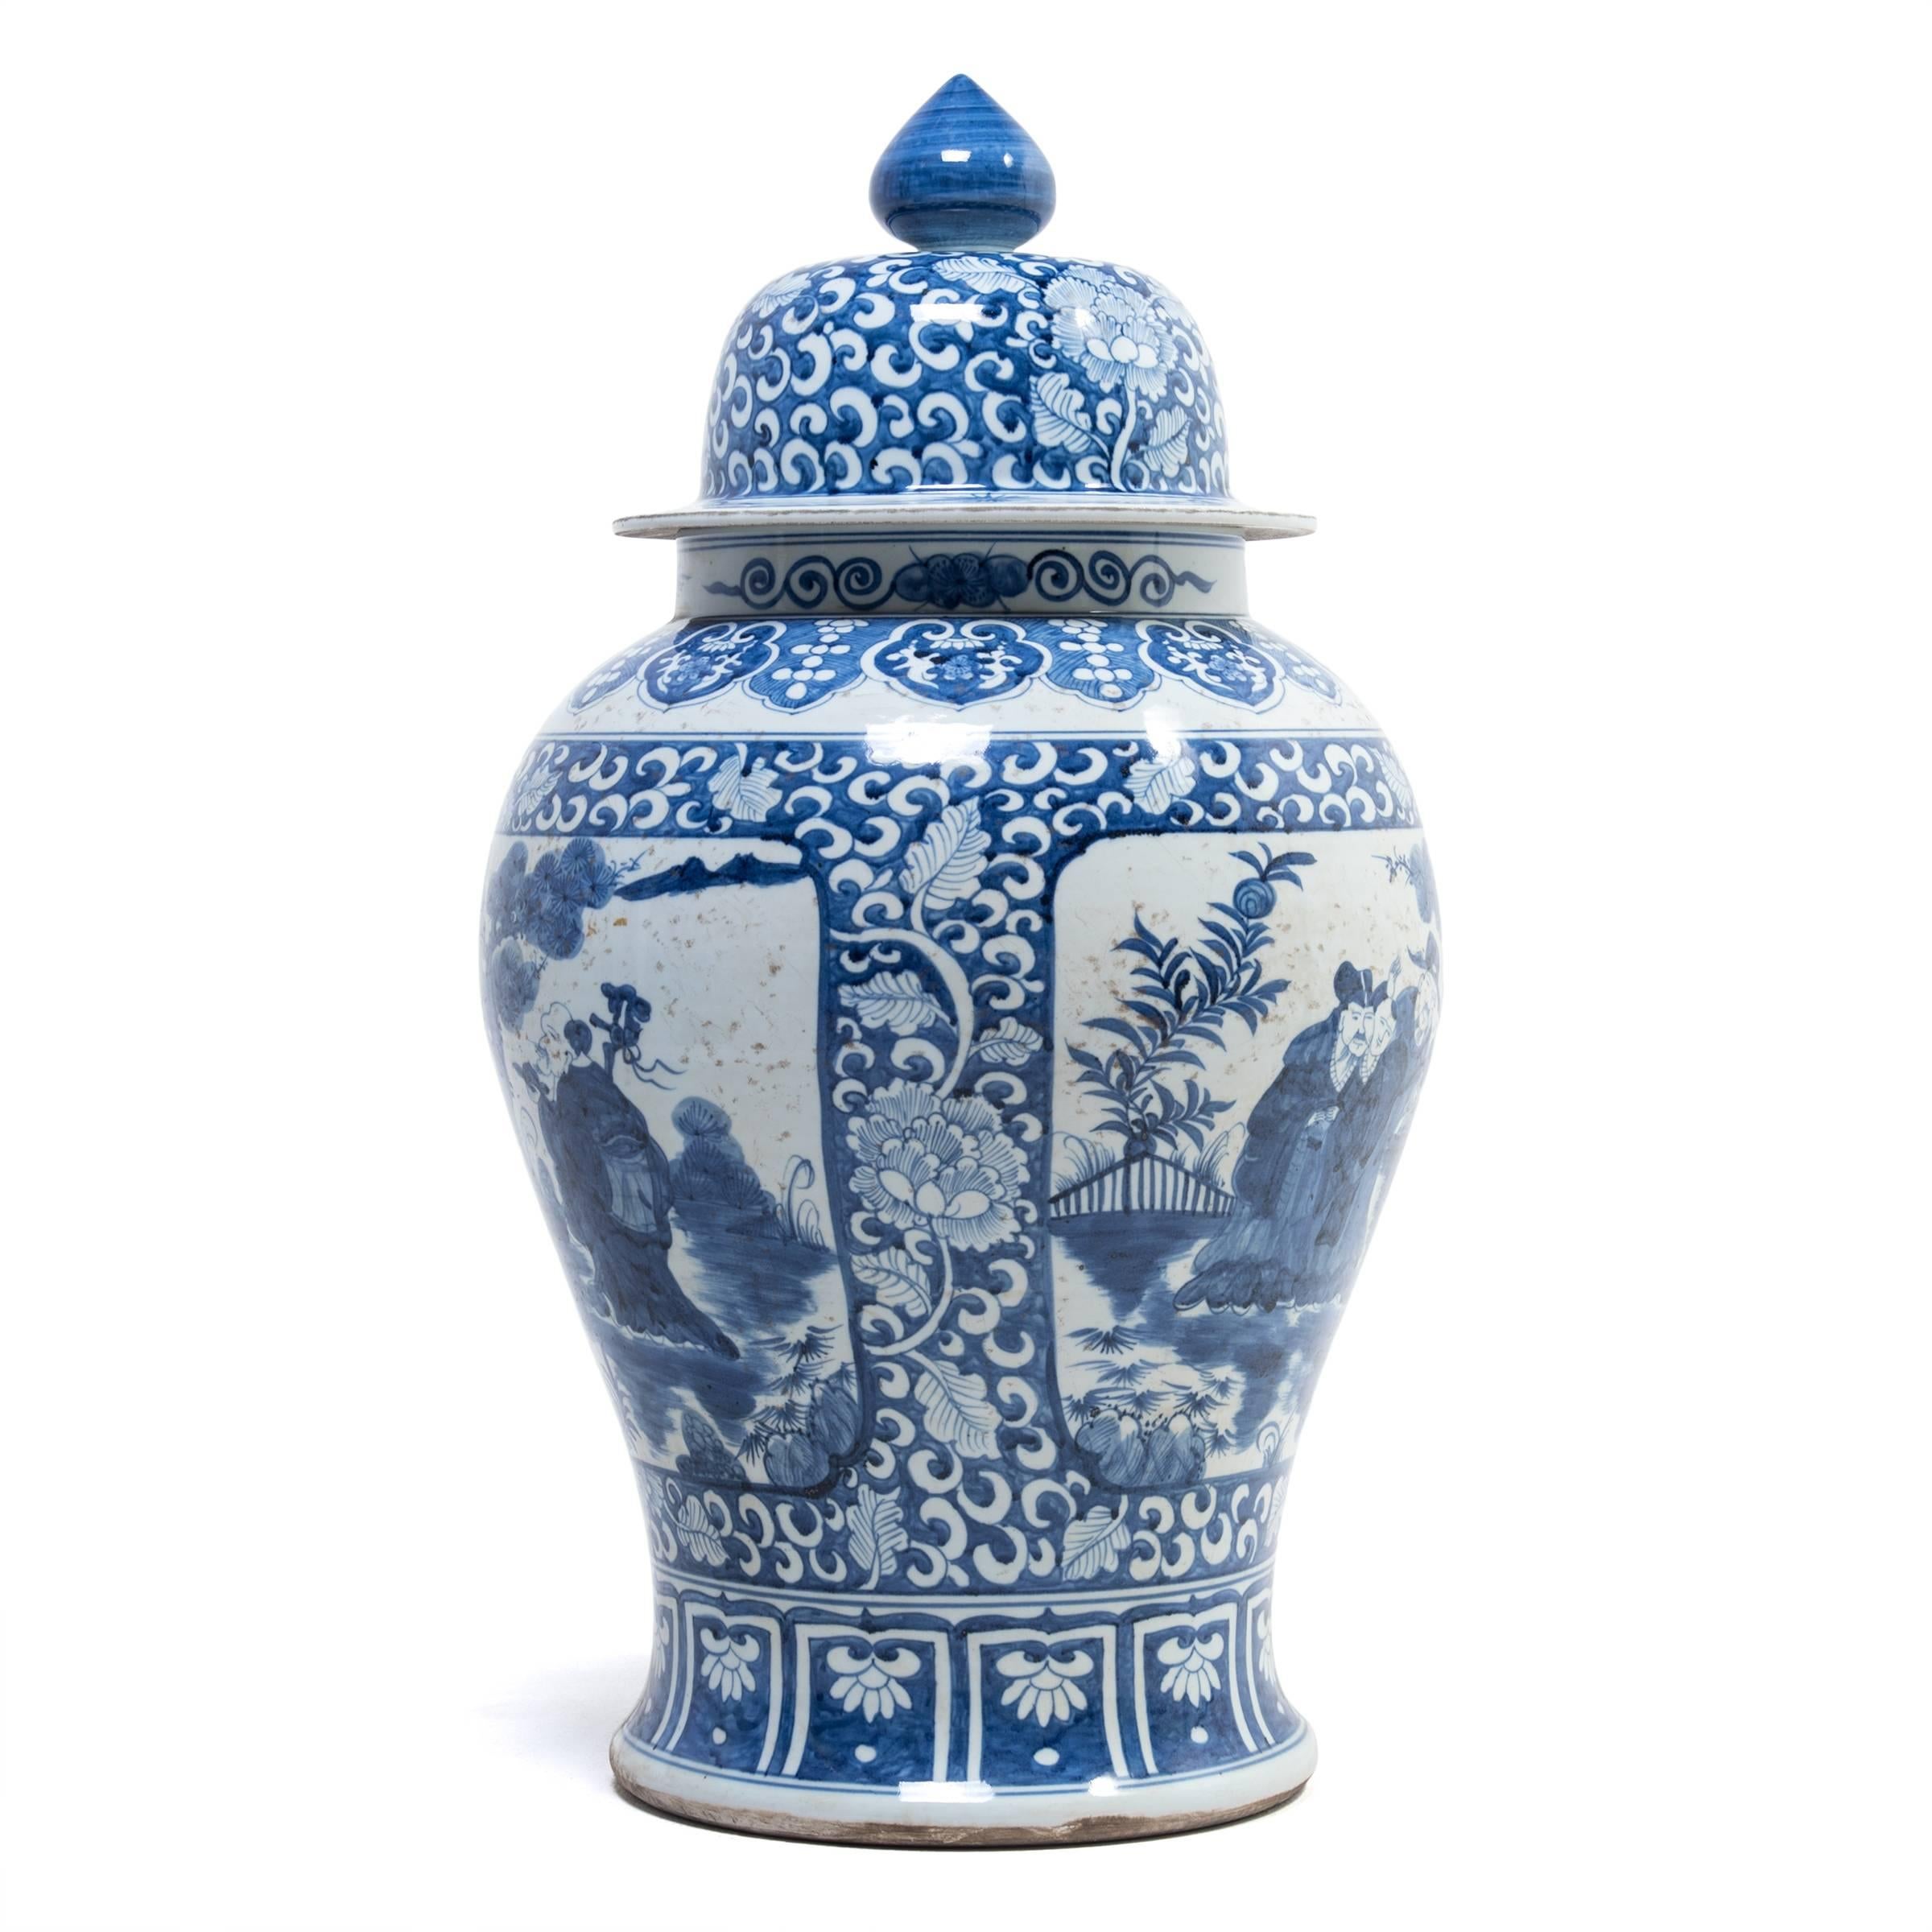 Glazed Blue and White Ginger Jar with Scholars in a Garden Portraits